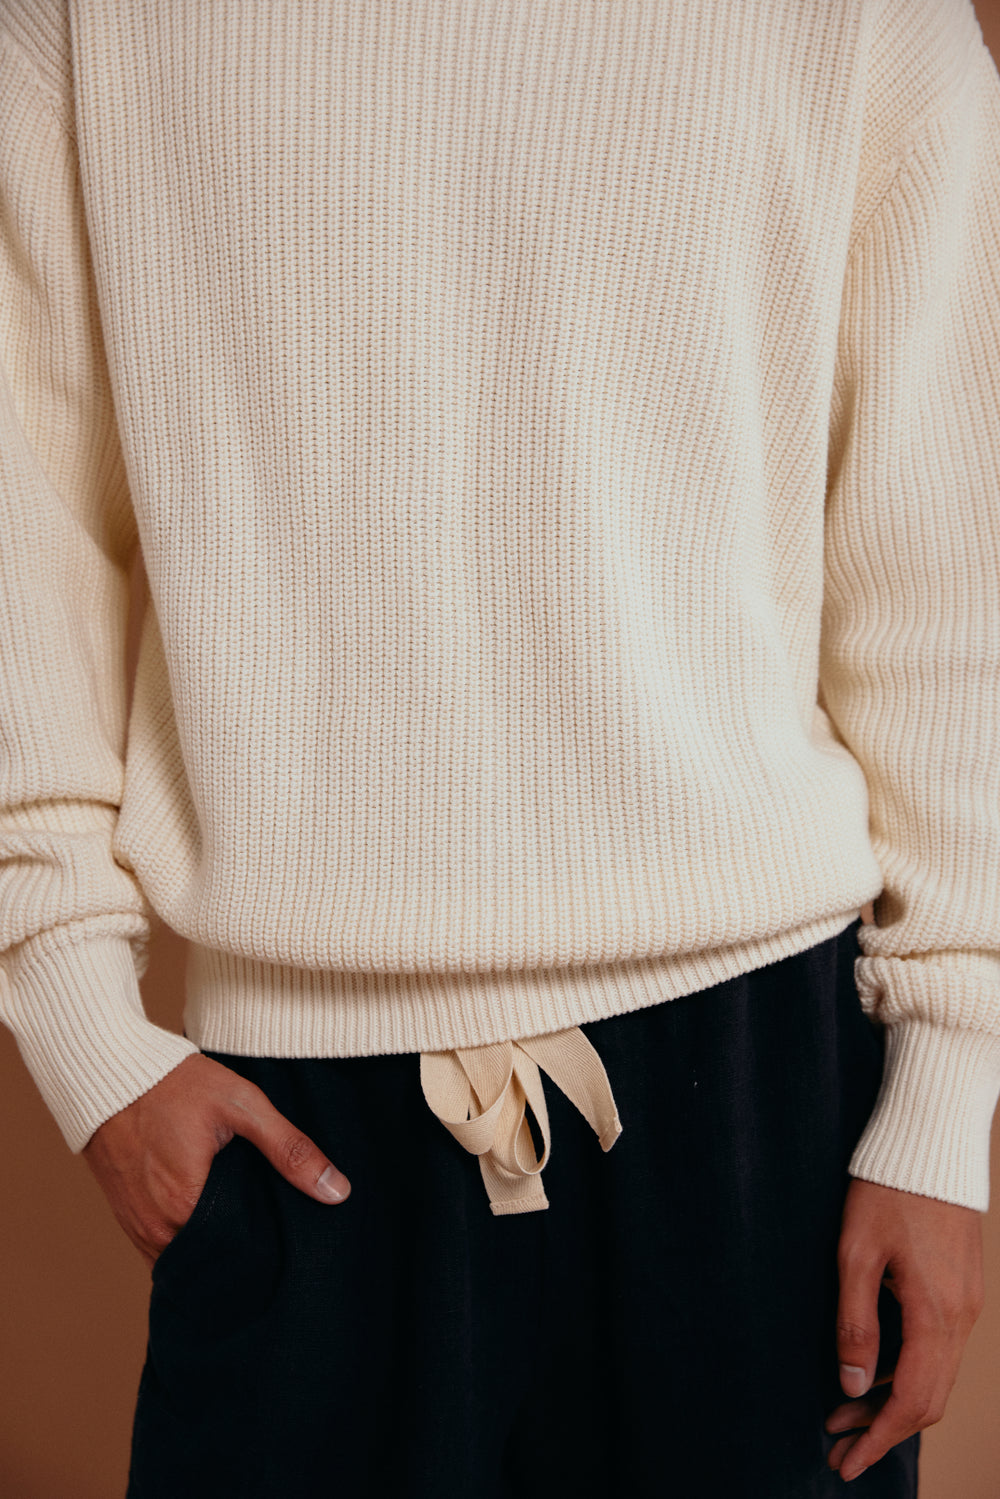 The Knit Sweater